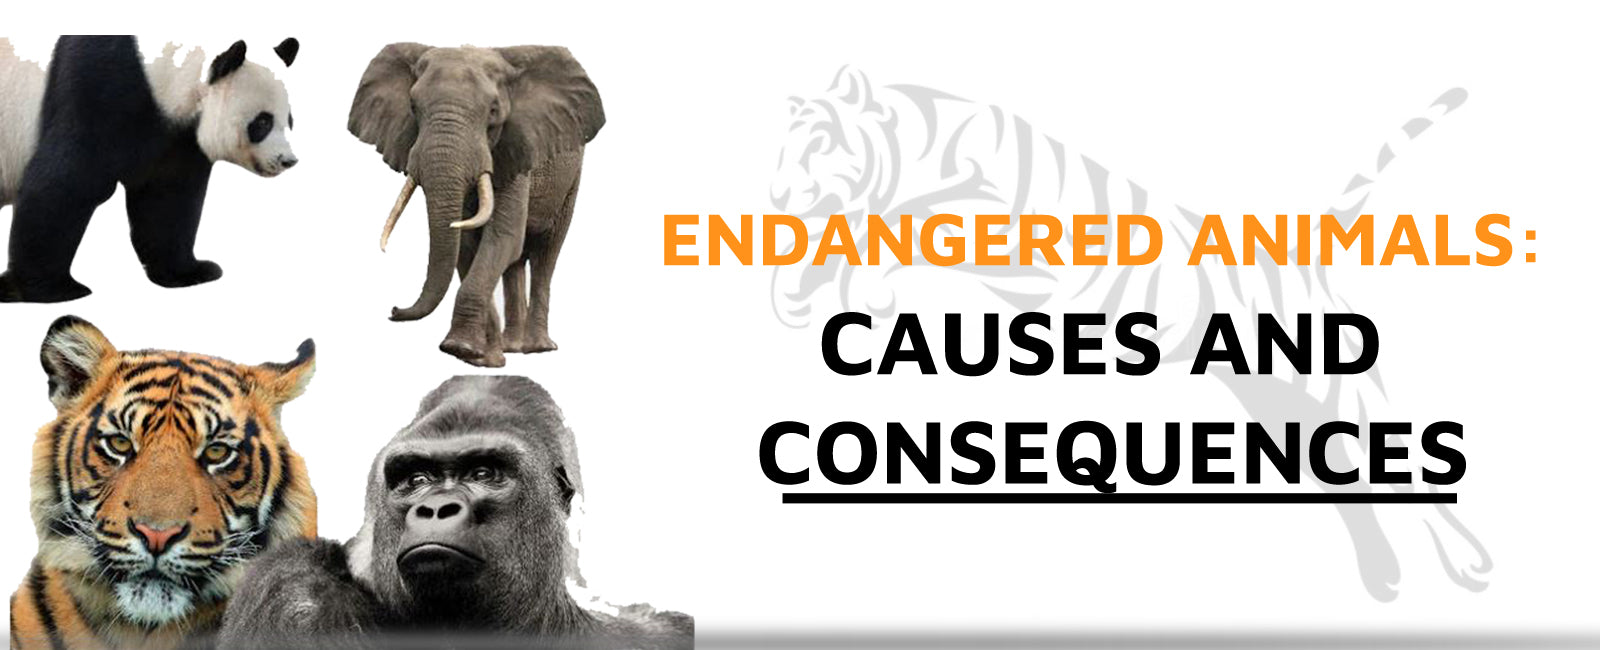 Endangered Animals: Causes and Consequences